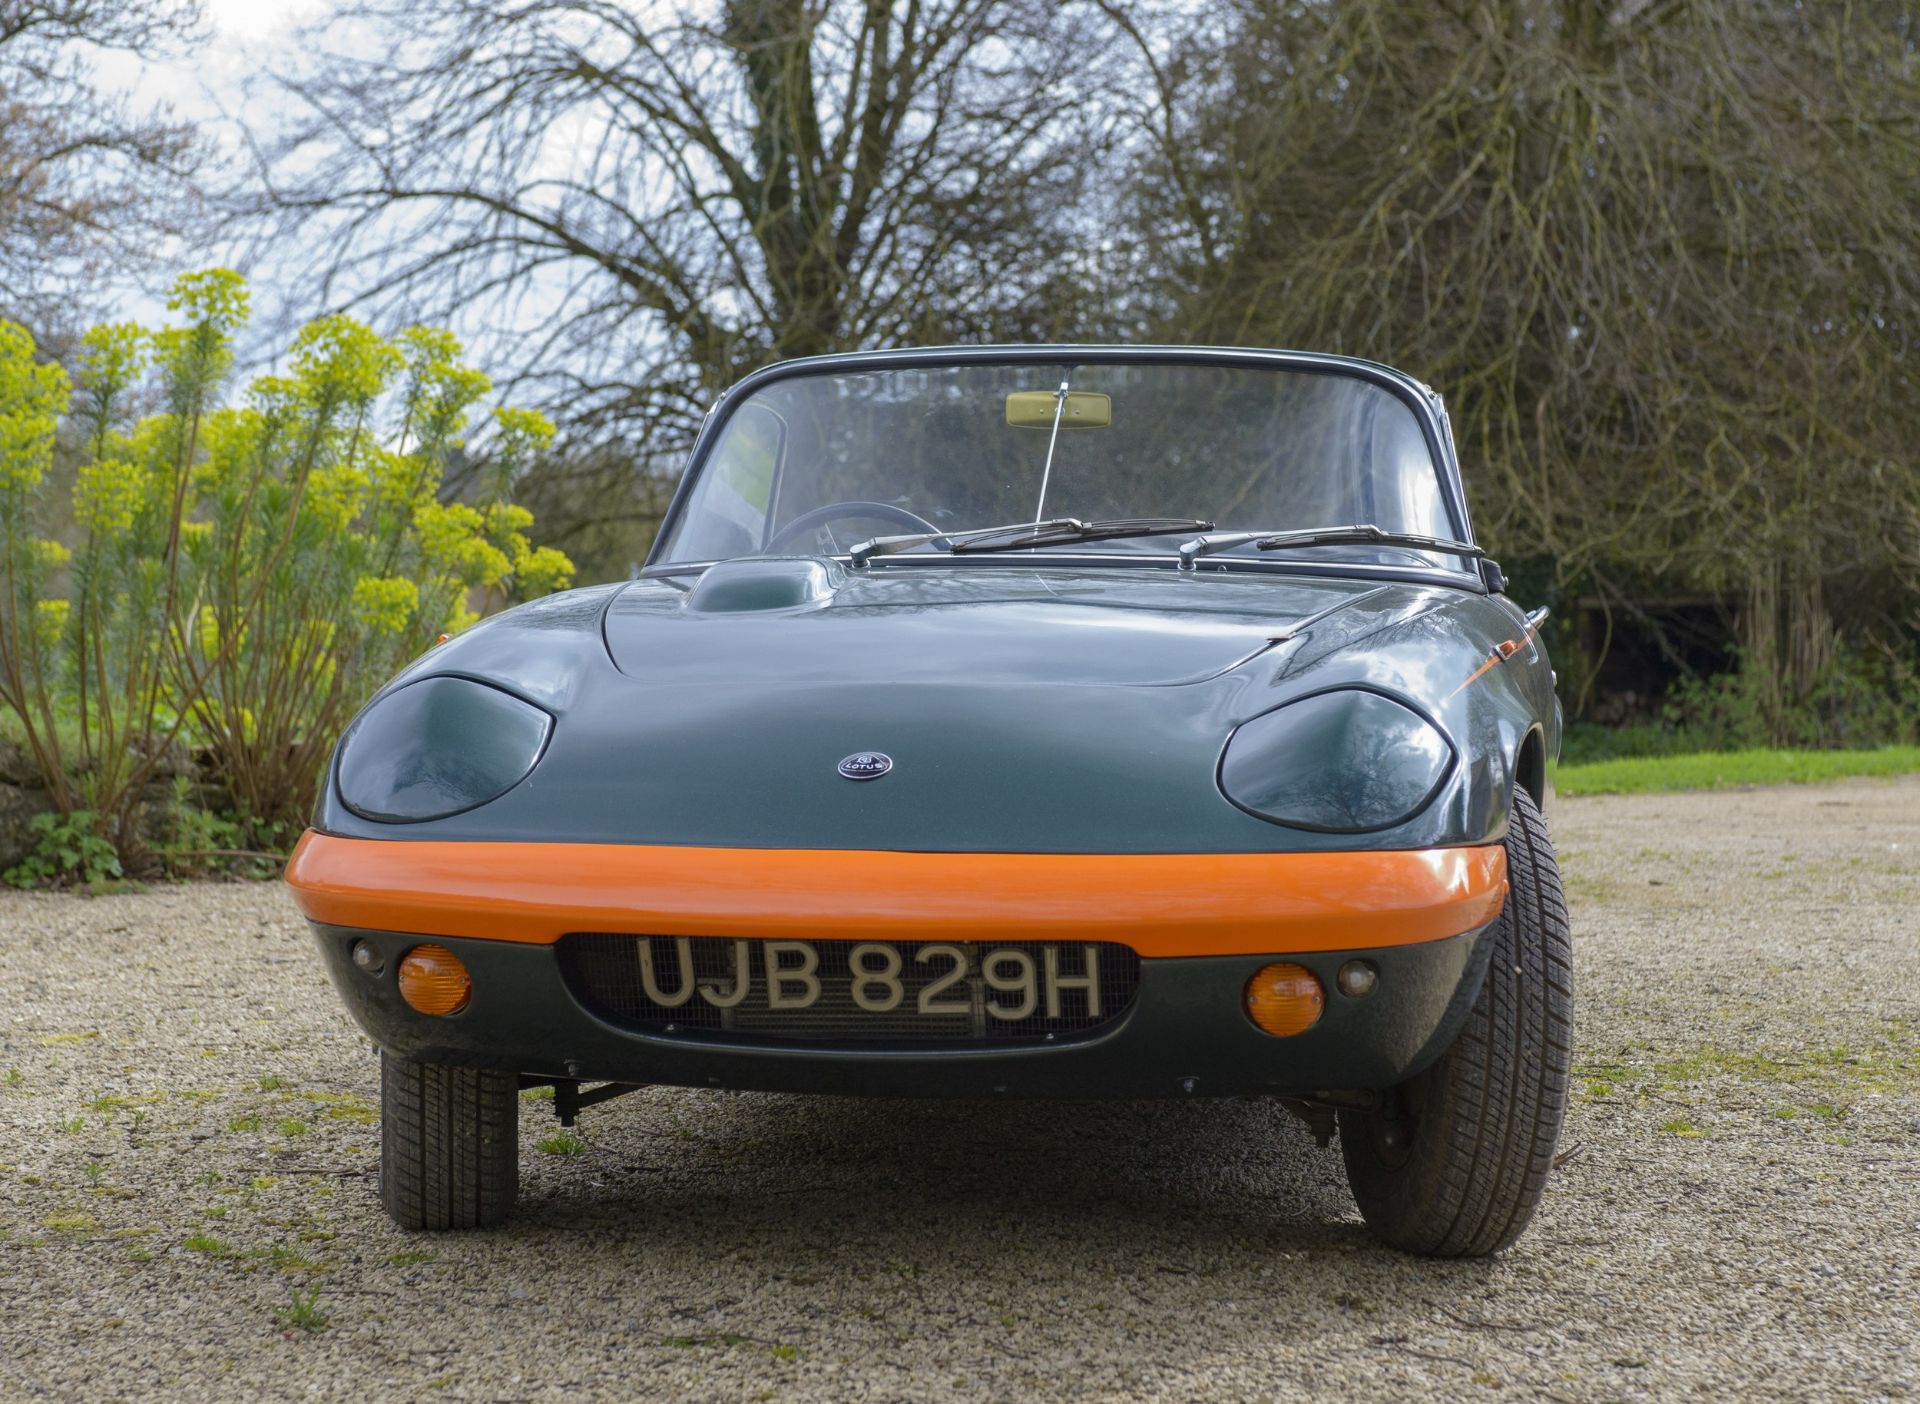 1969 LOTUS ELAN SERIES 4 BRM DROPHEAD COUPE Chassis Number: 45/9498 Registration Number: UJB 829H - Image 3 of 33